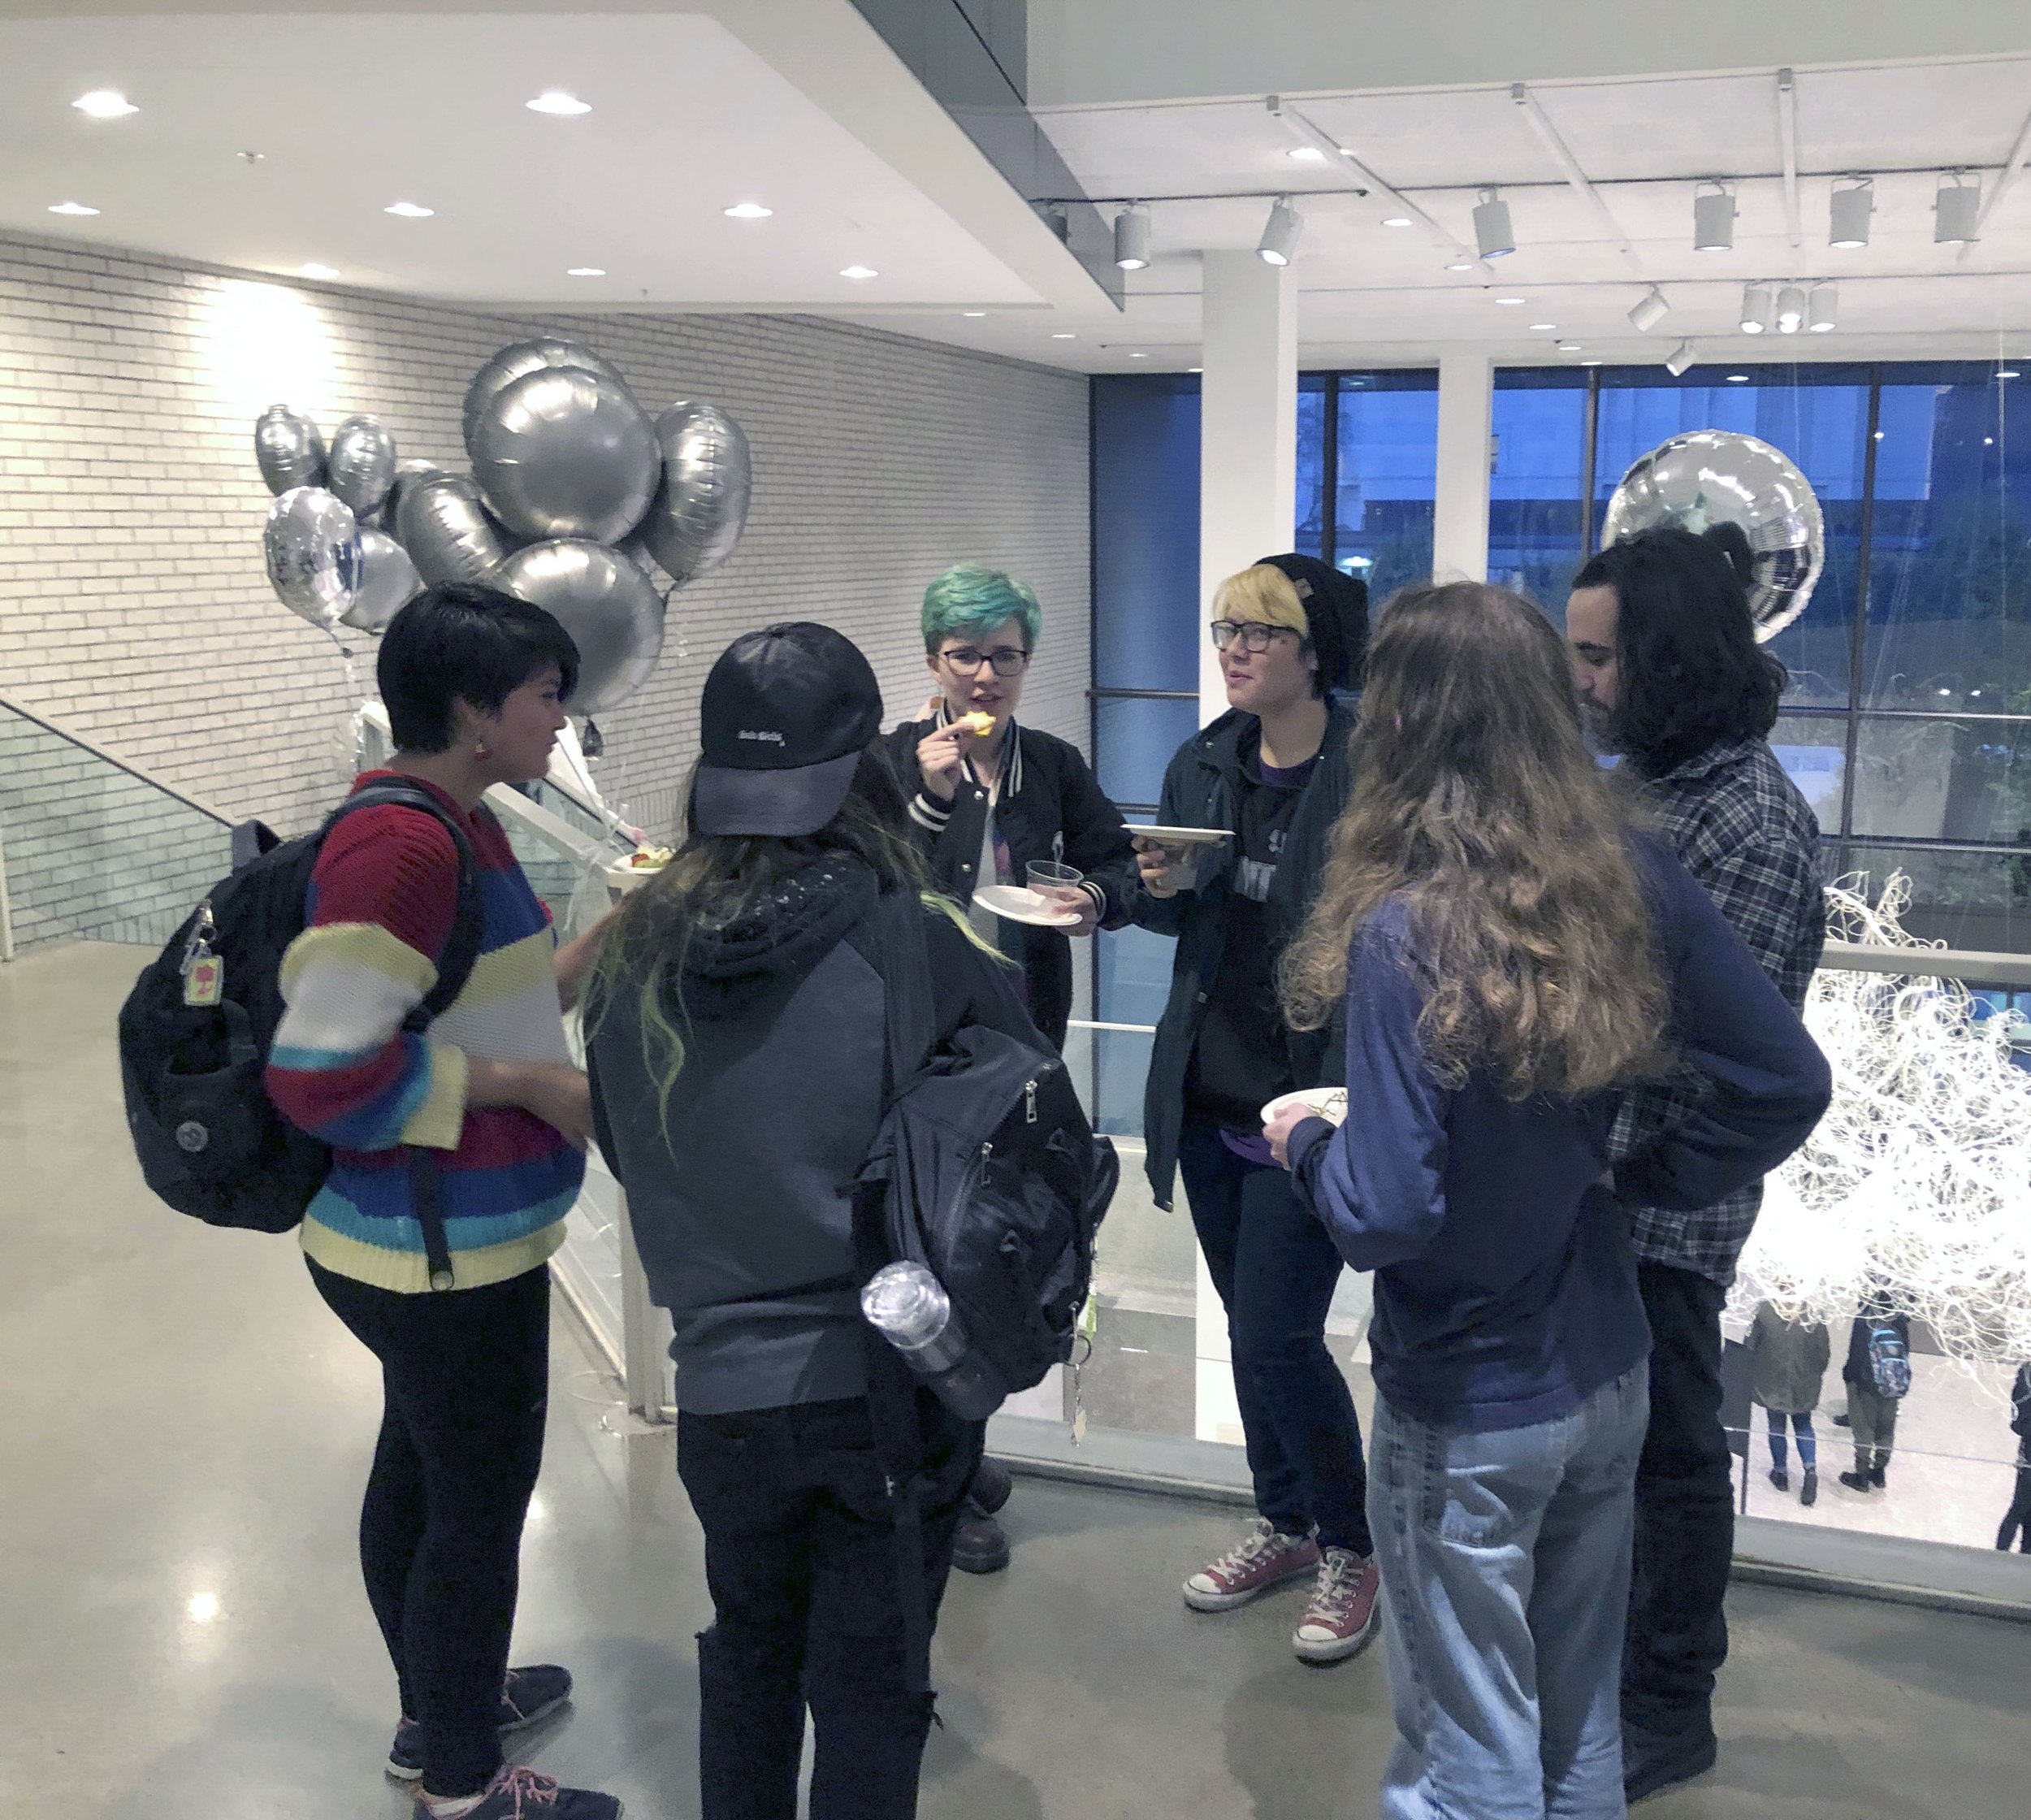 Guests at the Minneapolis College of Art and Design